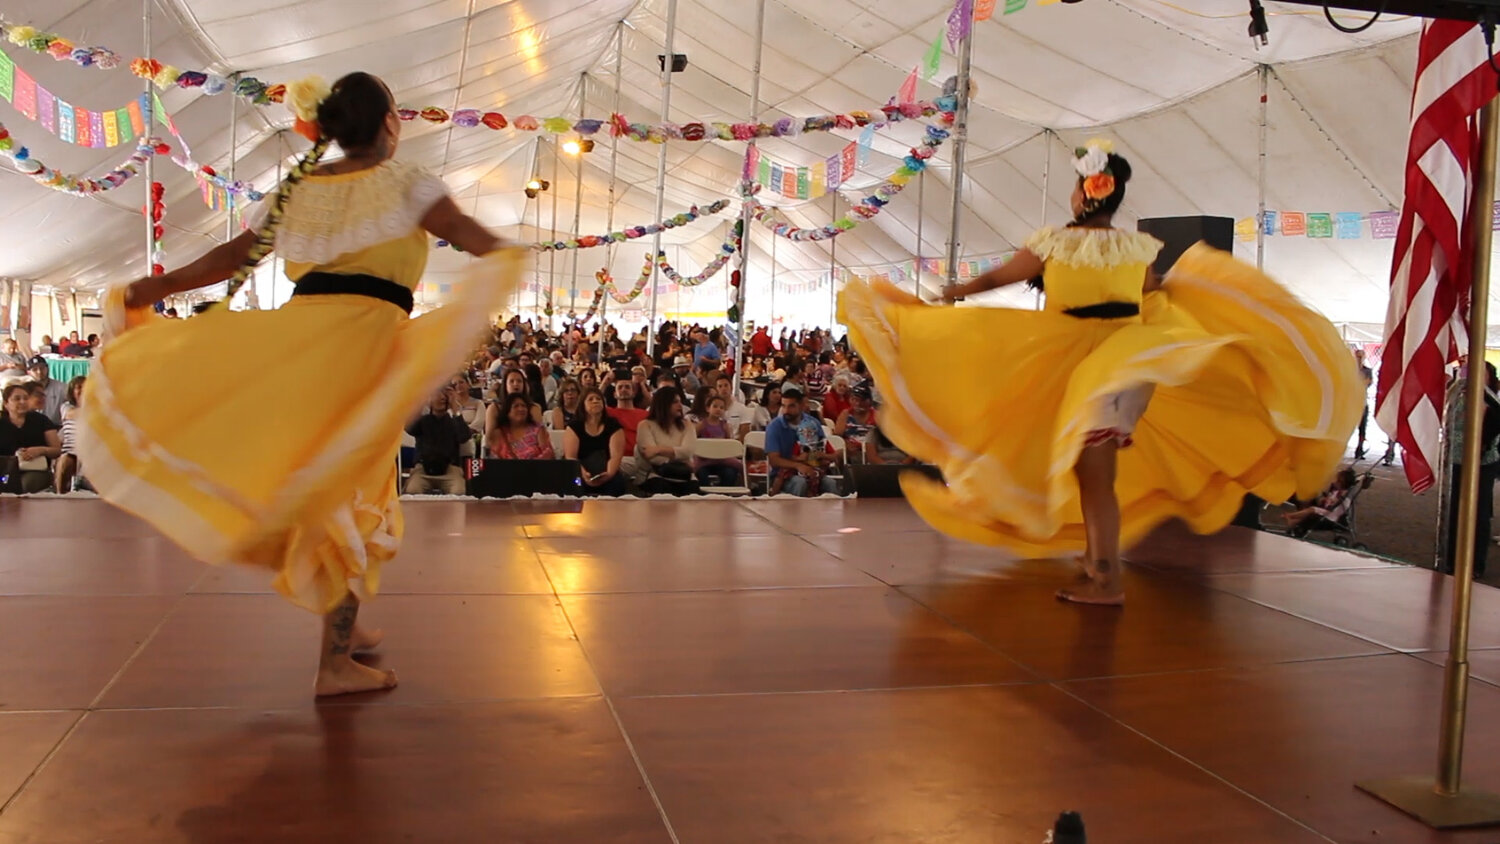 Cristo Rey Church’s annual Cristo Rey Fiesta, taking place Friday through Sunday, offers authentic Mexican food, live music, dance performances, a market, a raffle and more.